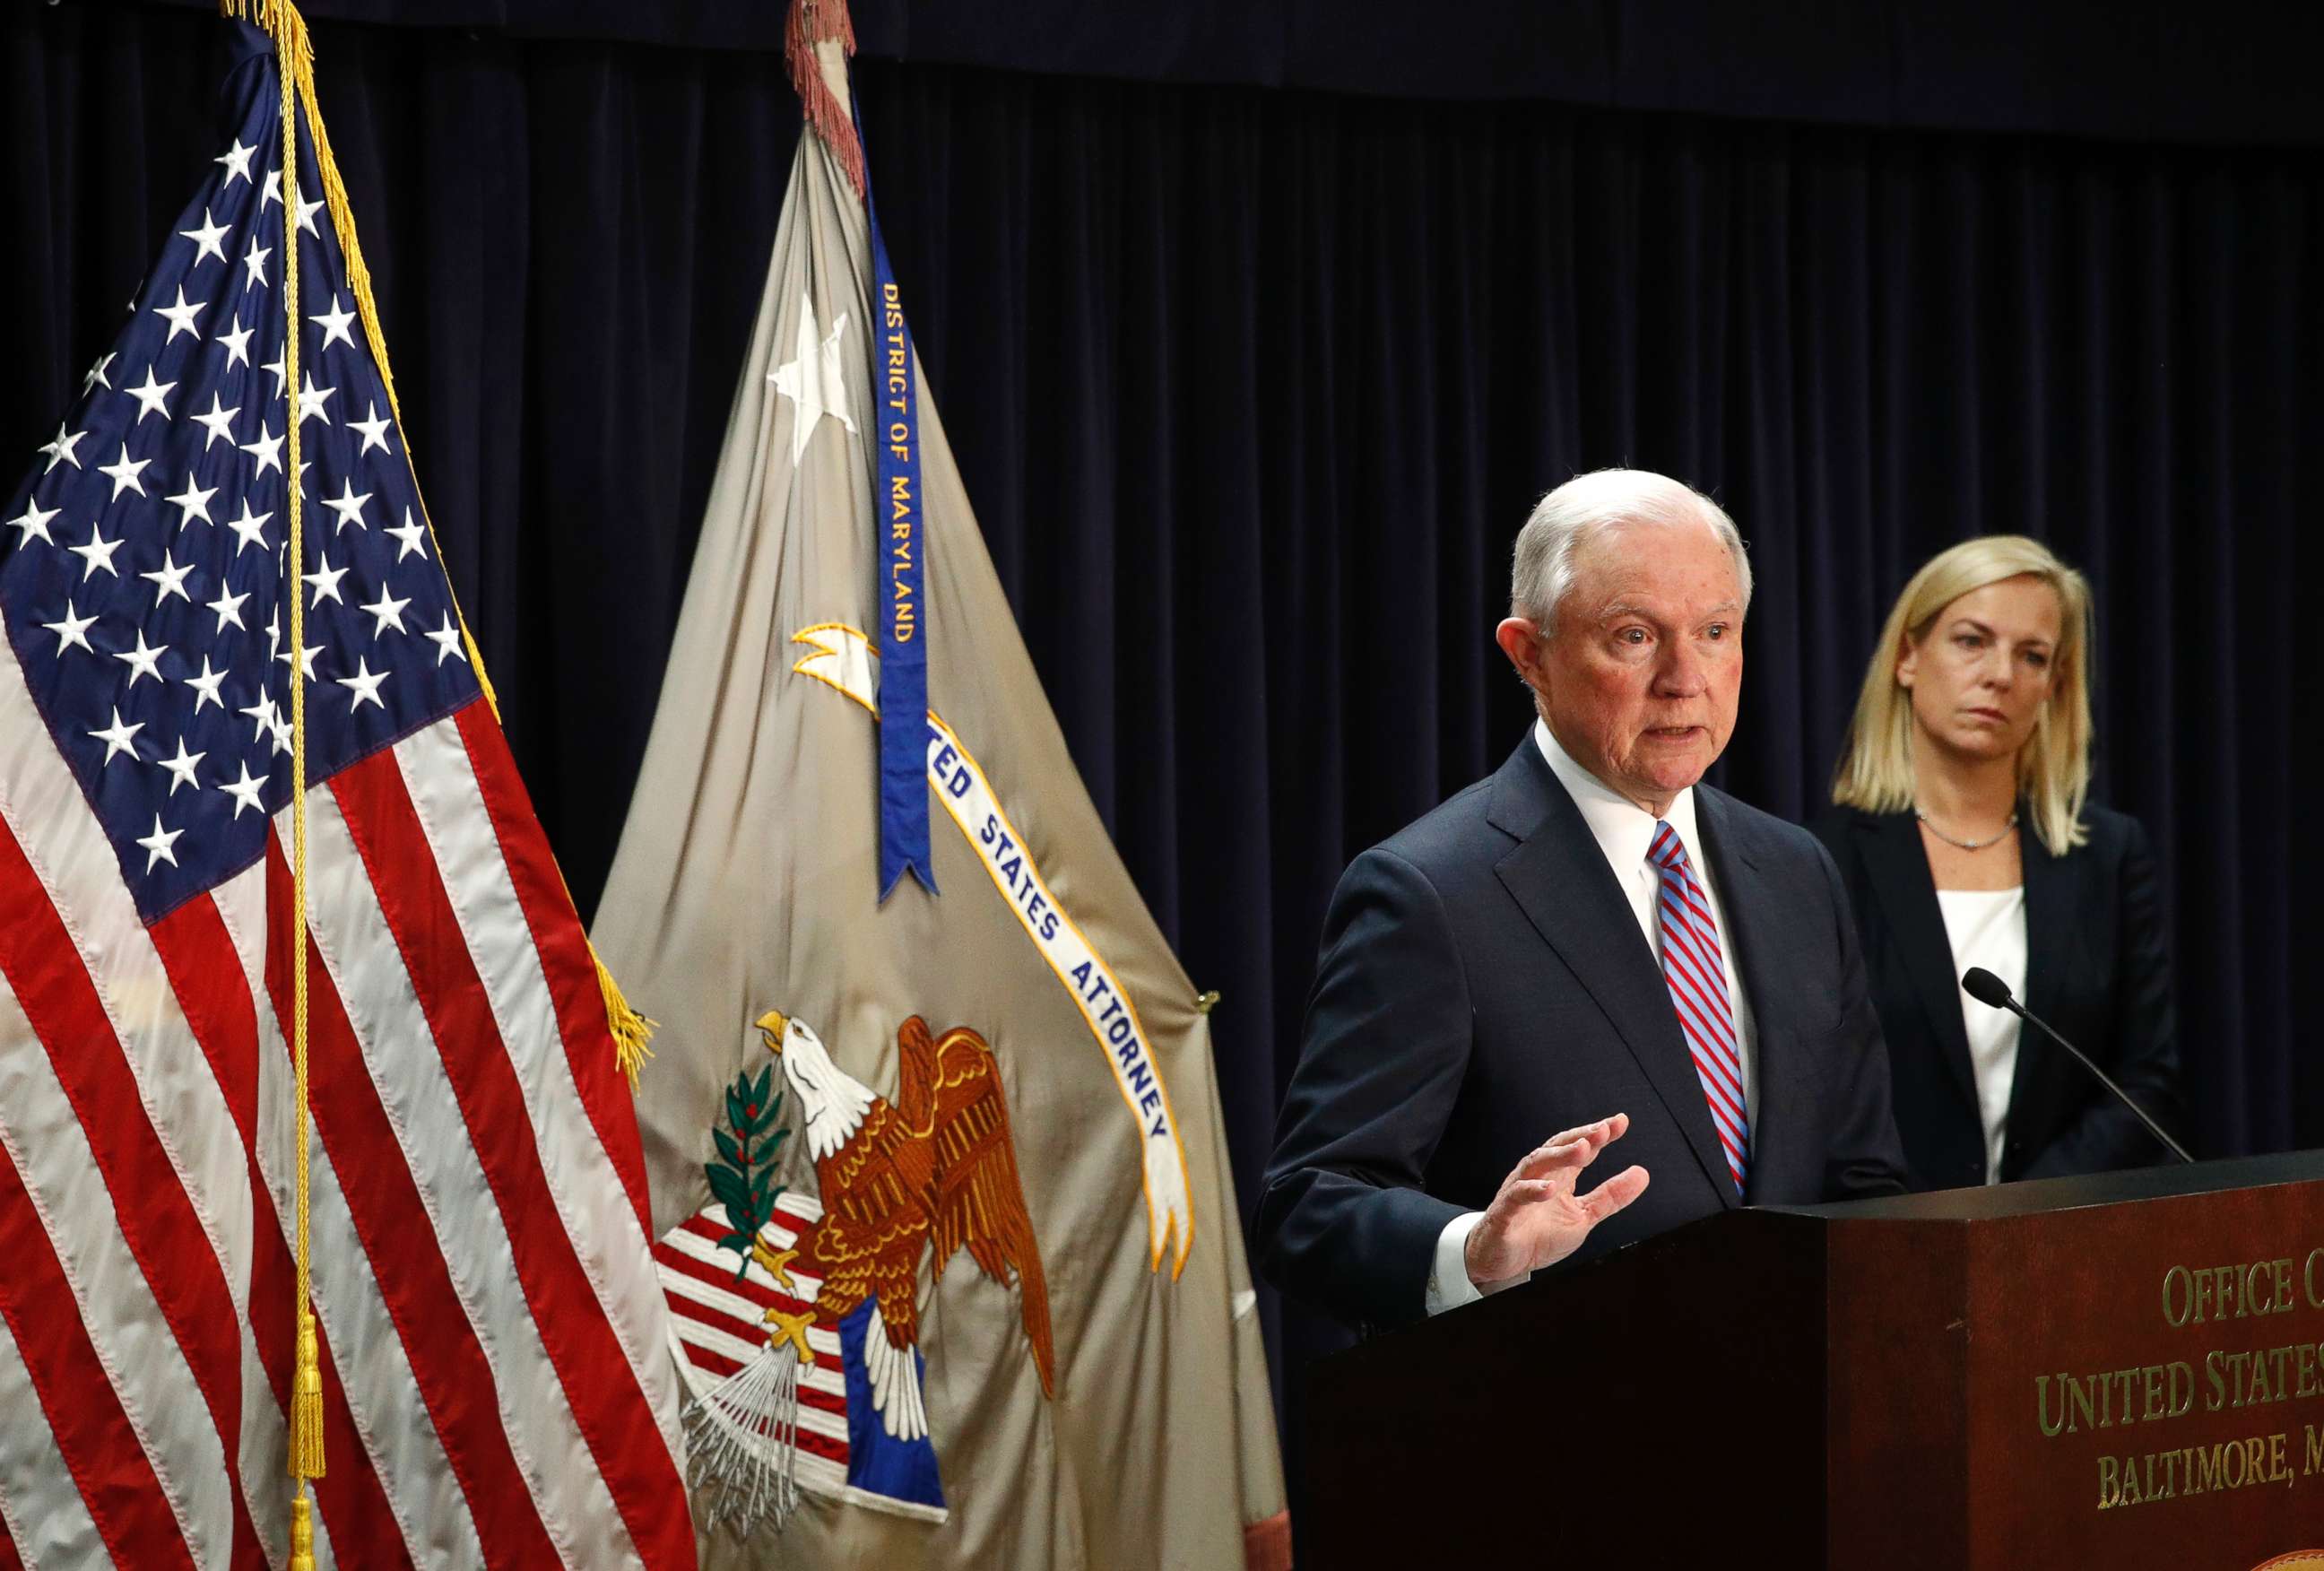 PHOTO: Attorney General Jeff Sessions speaks alongside Secretary of Homeland Security Kirstjen Nielsen during a news conference in Baltimore, Dec. 12, 2017, to announce efforts to combat the MS-13 street gang with law enforcement and immigration actions.